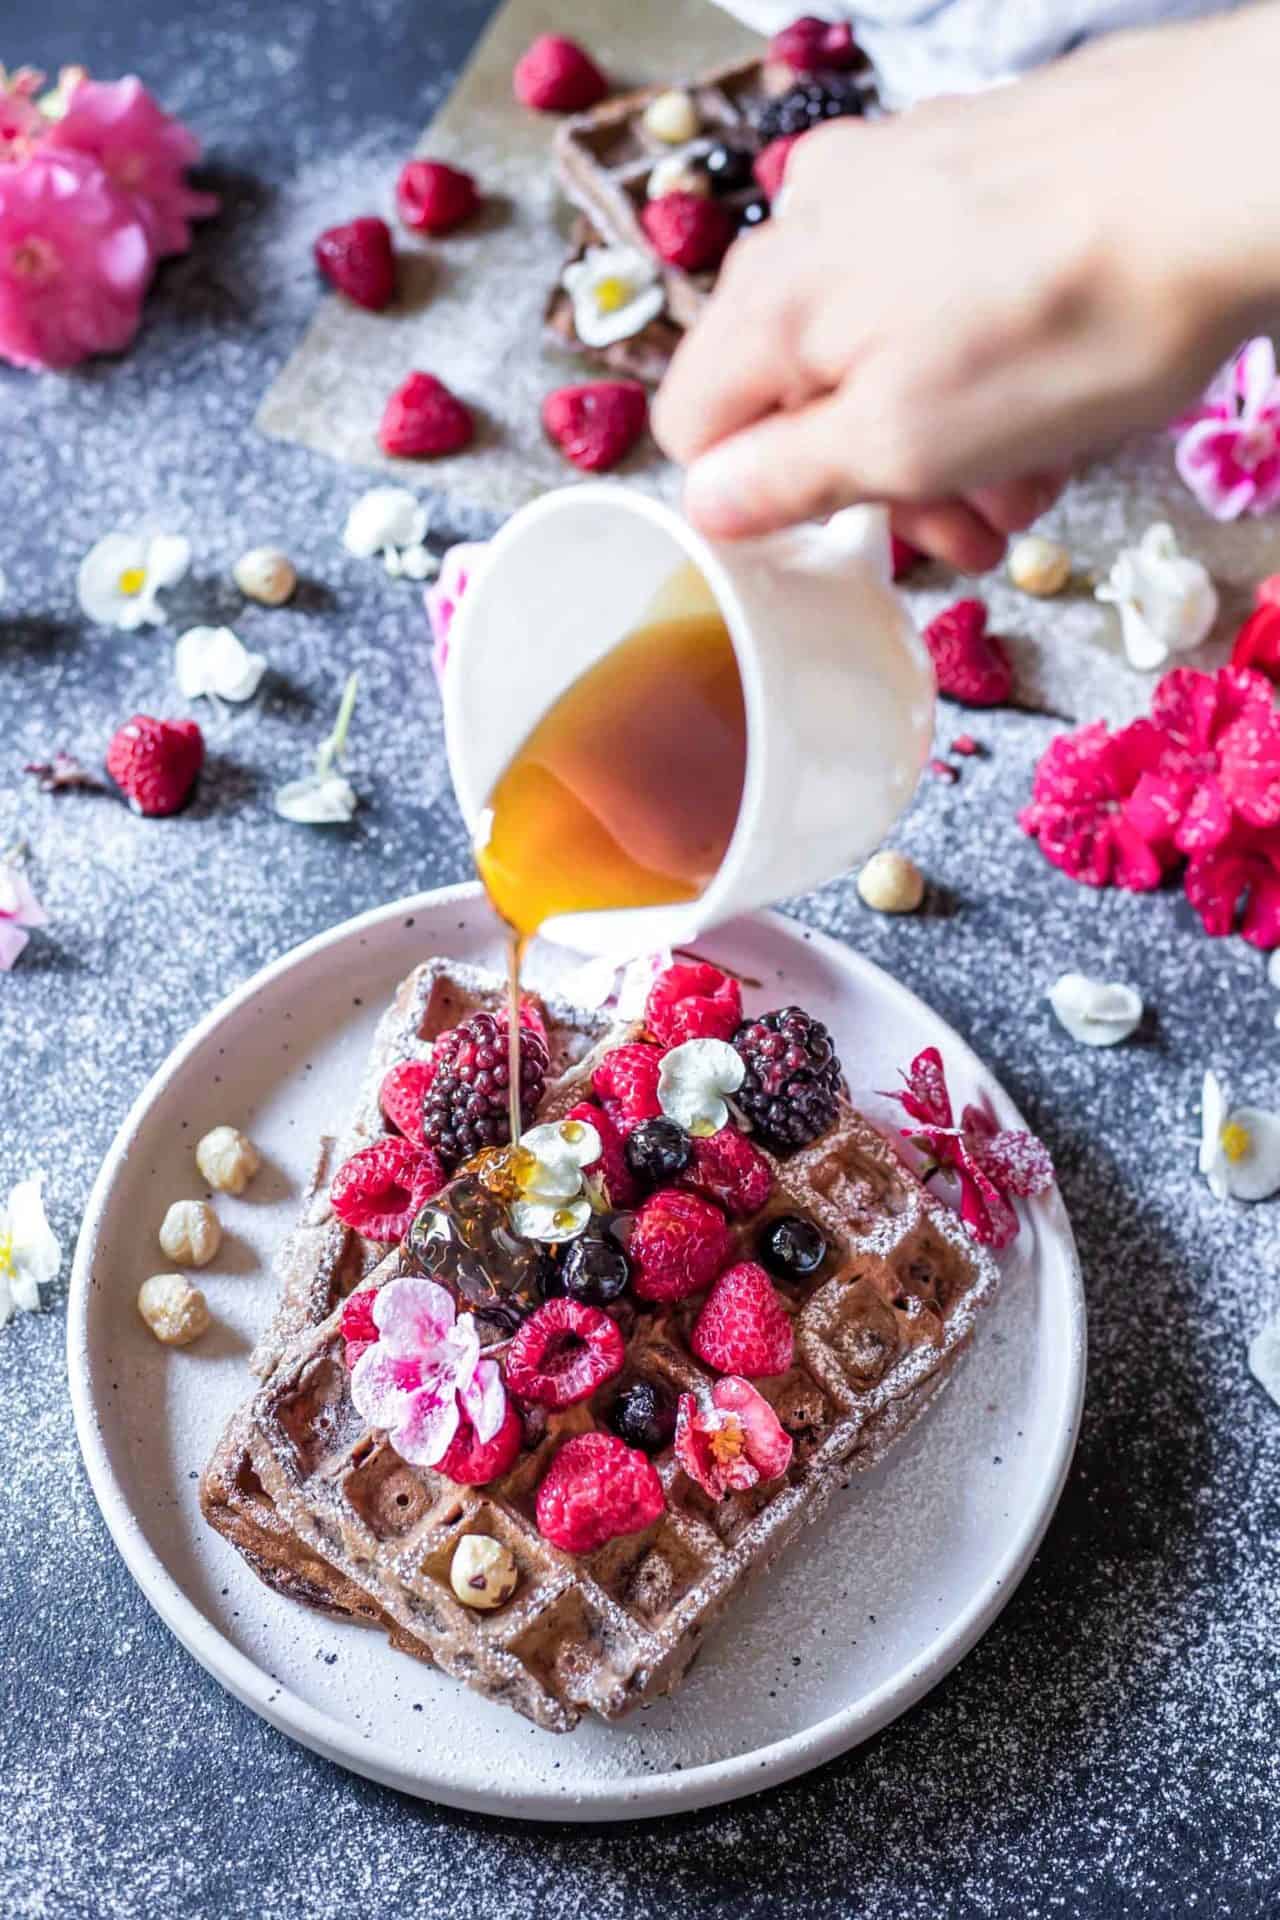 Low FODMAP and Gluten-Free Chocolate Waffles. Only 10 ingredients, simple, flavorful, fluffy, chocolatey and so yum. Perfect indulging breakfast or brunch.